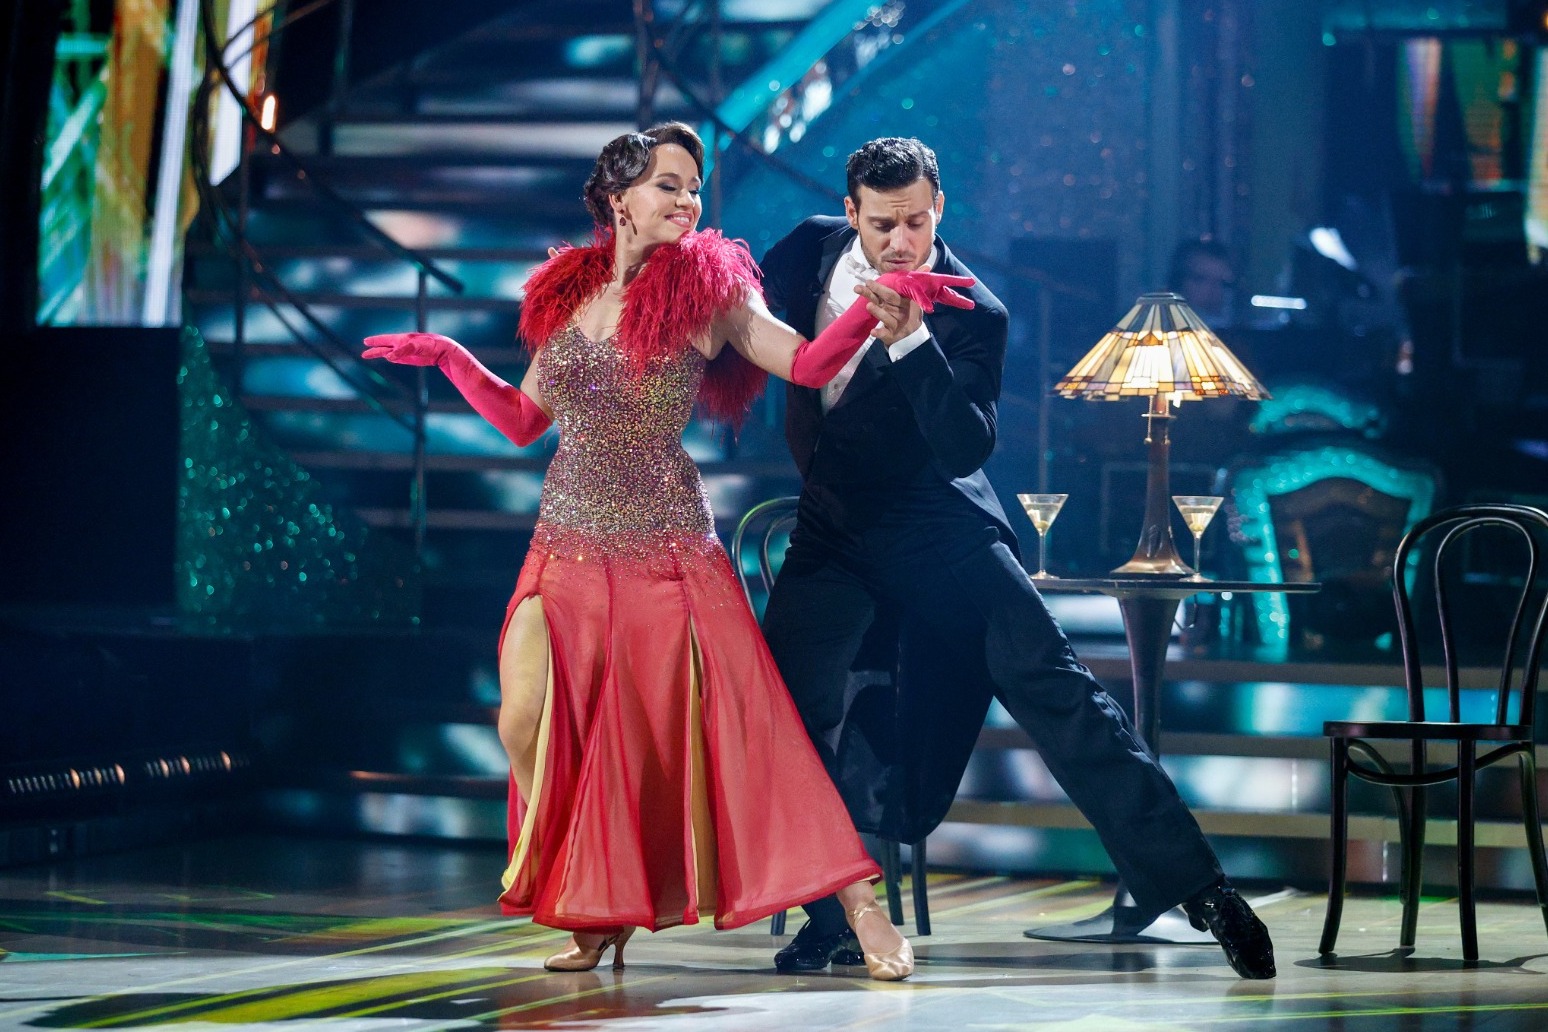 Ellie Leach becomes youngest person to win Strictly Come Dancing 